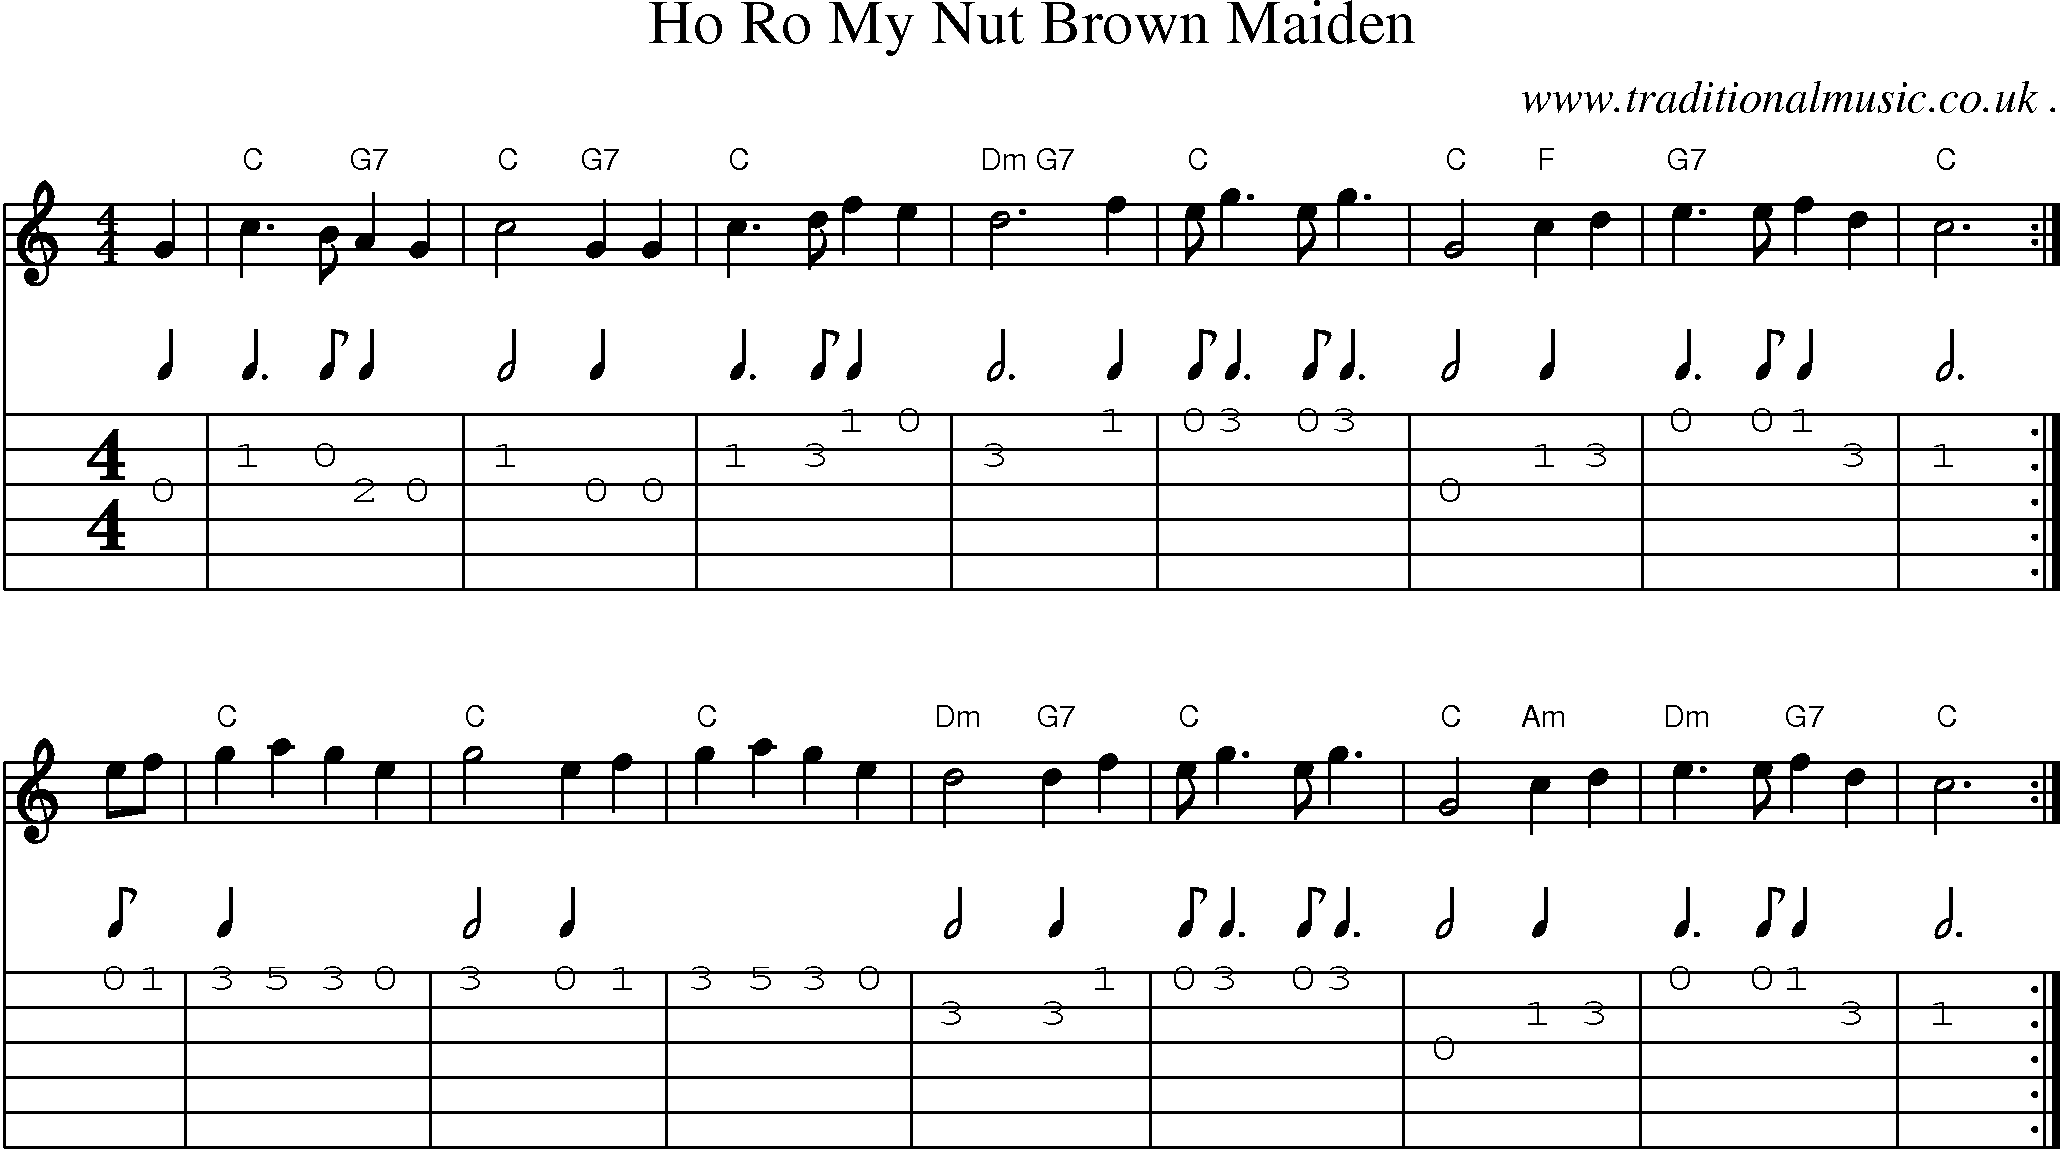 Sheet-Music and Guitar Tabs for Ho Ro My Nut Brown Maiden